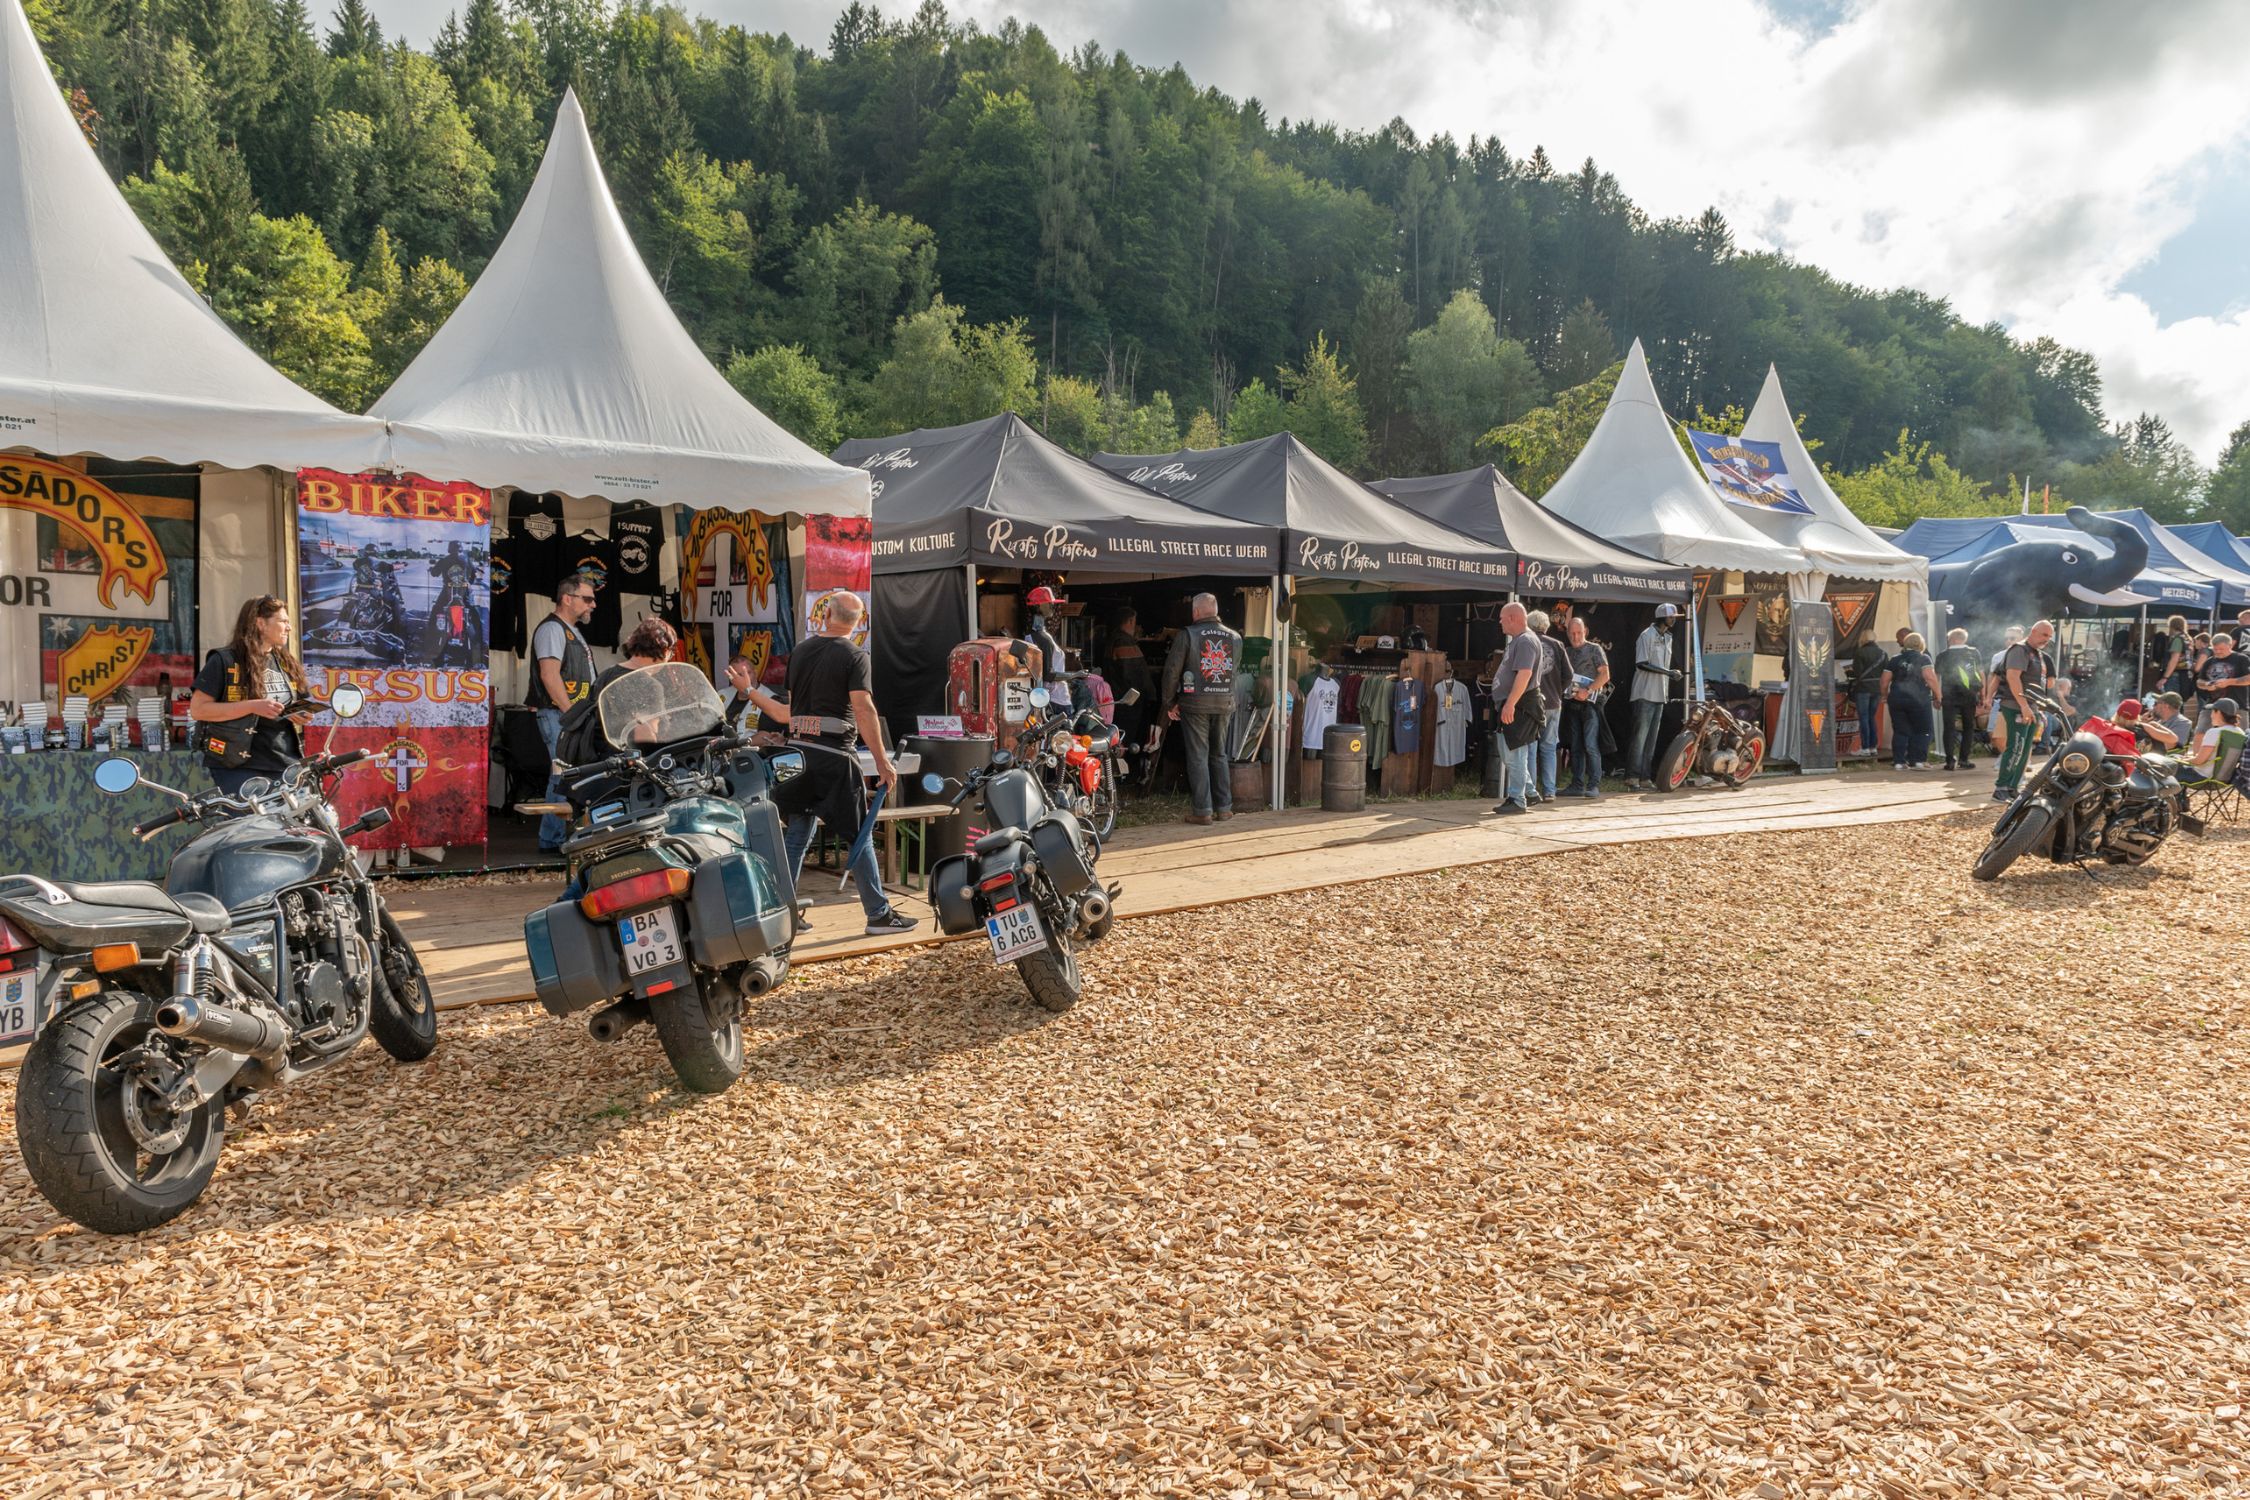 The tents of the Harley Village